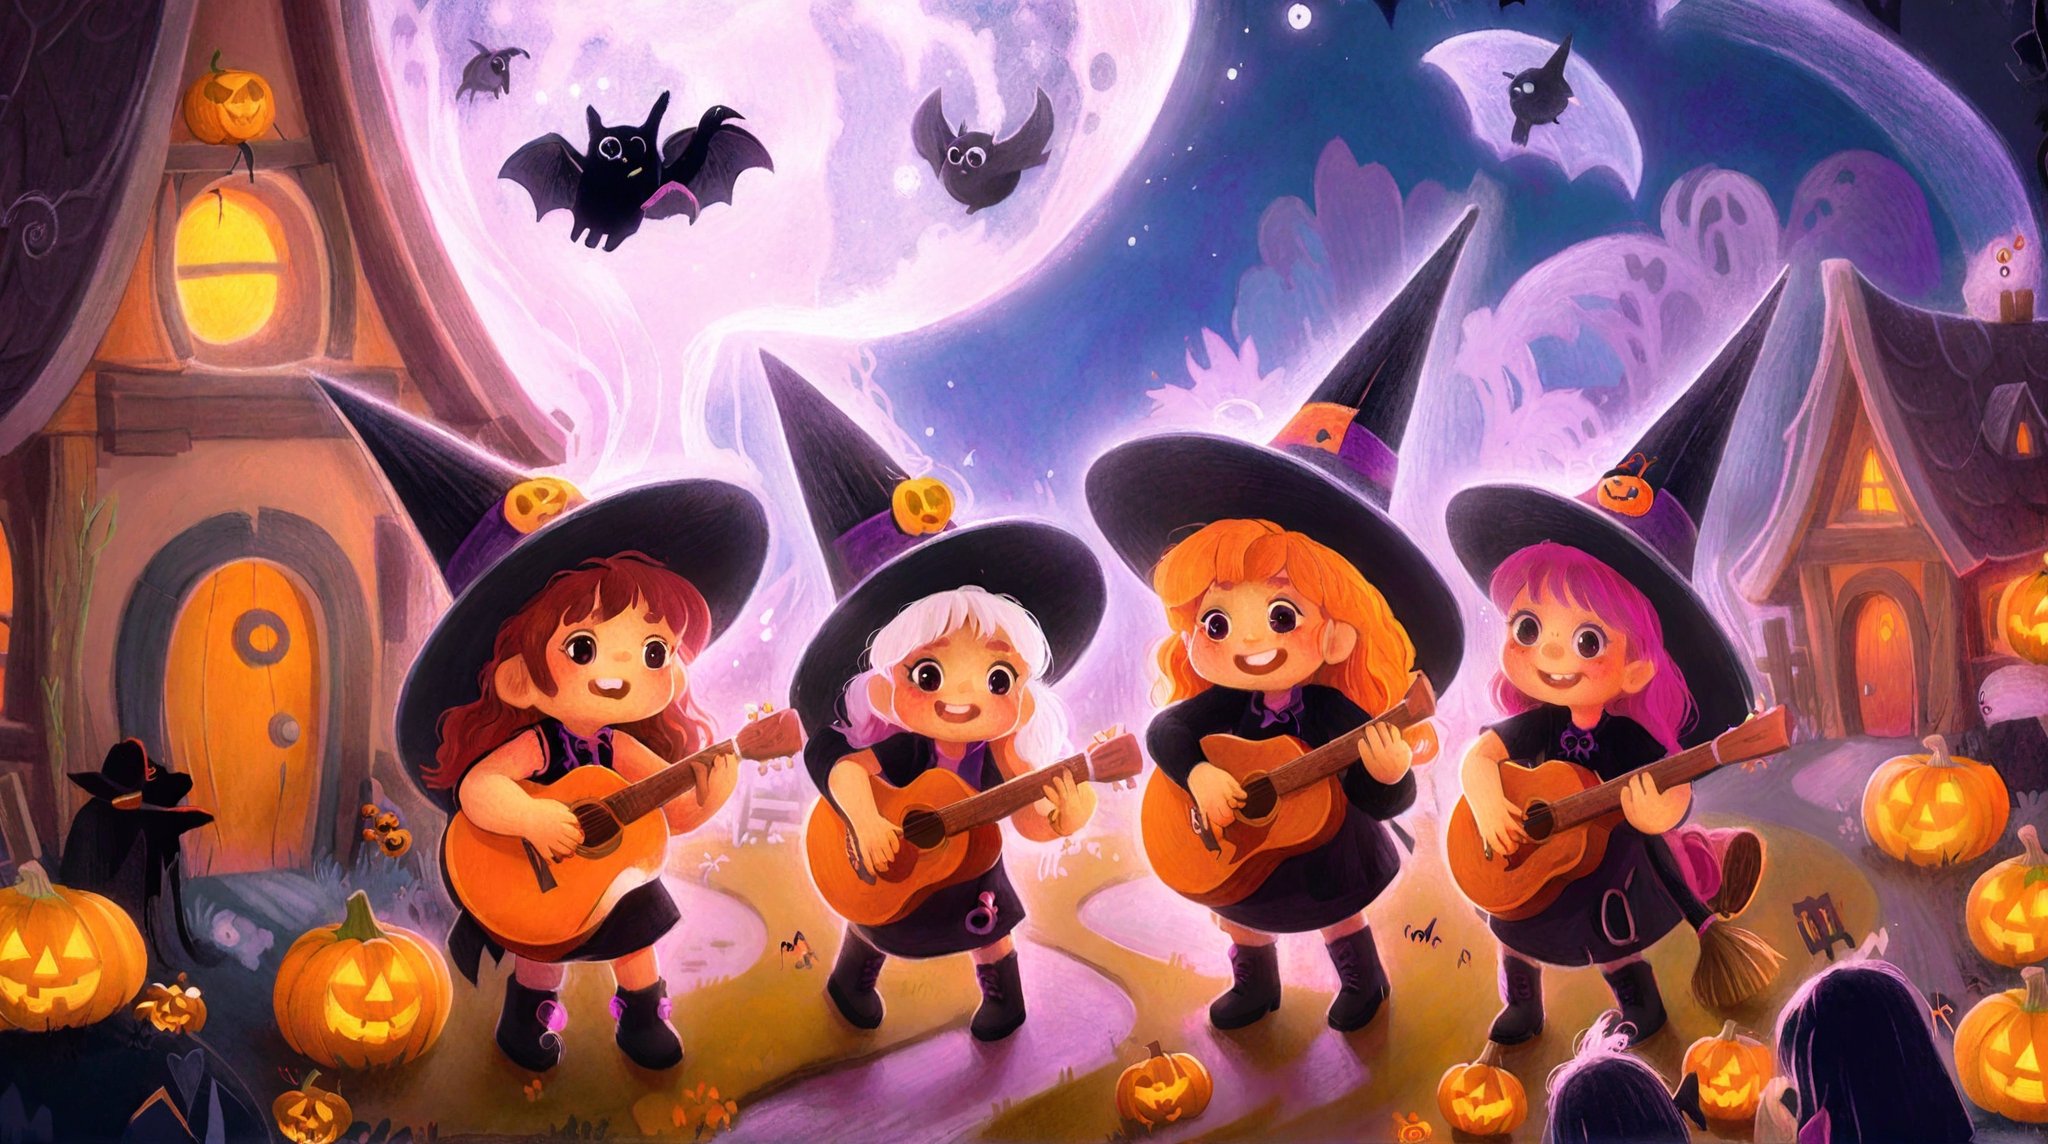 a rural fantasy village on halloween night, a group of cute witches singing with a guitar, happy mood, cartoon,